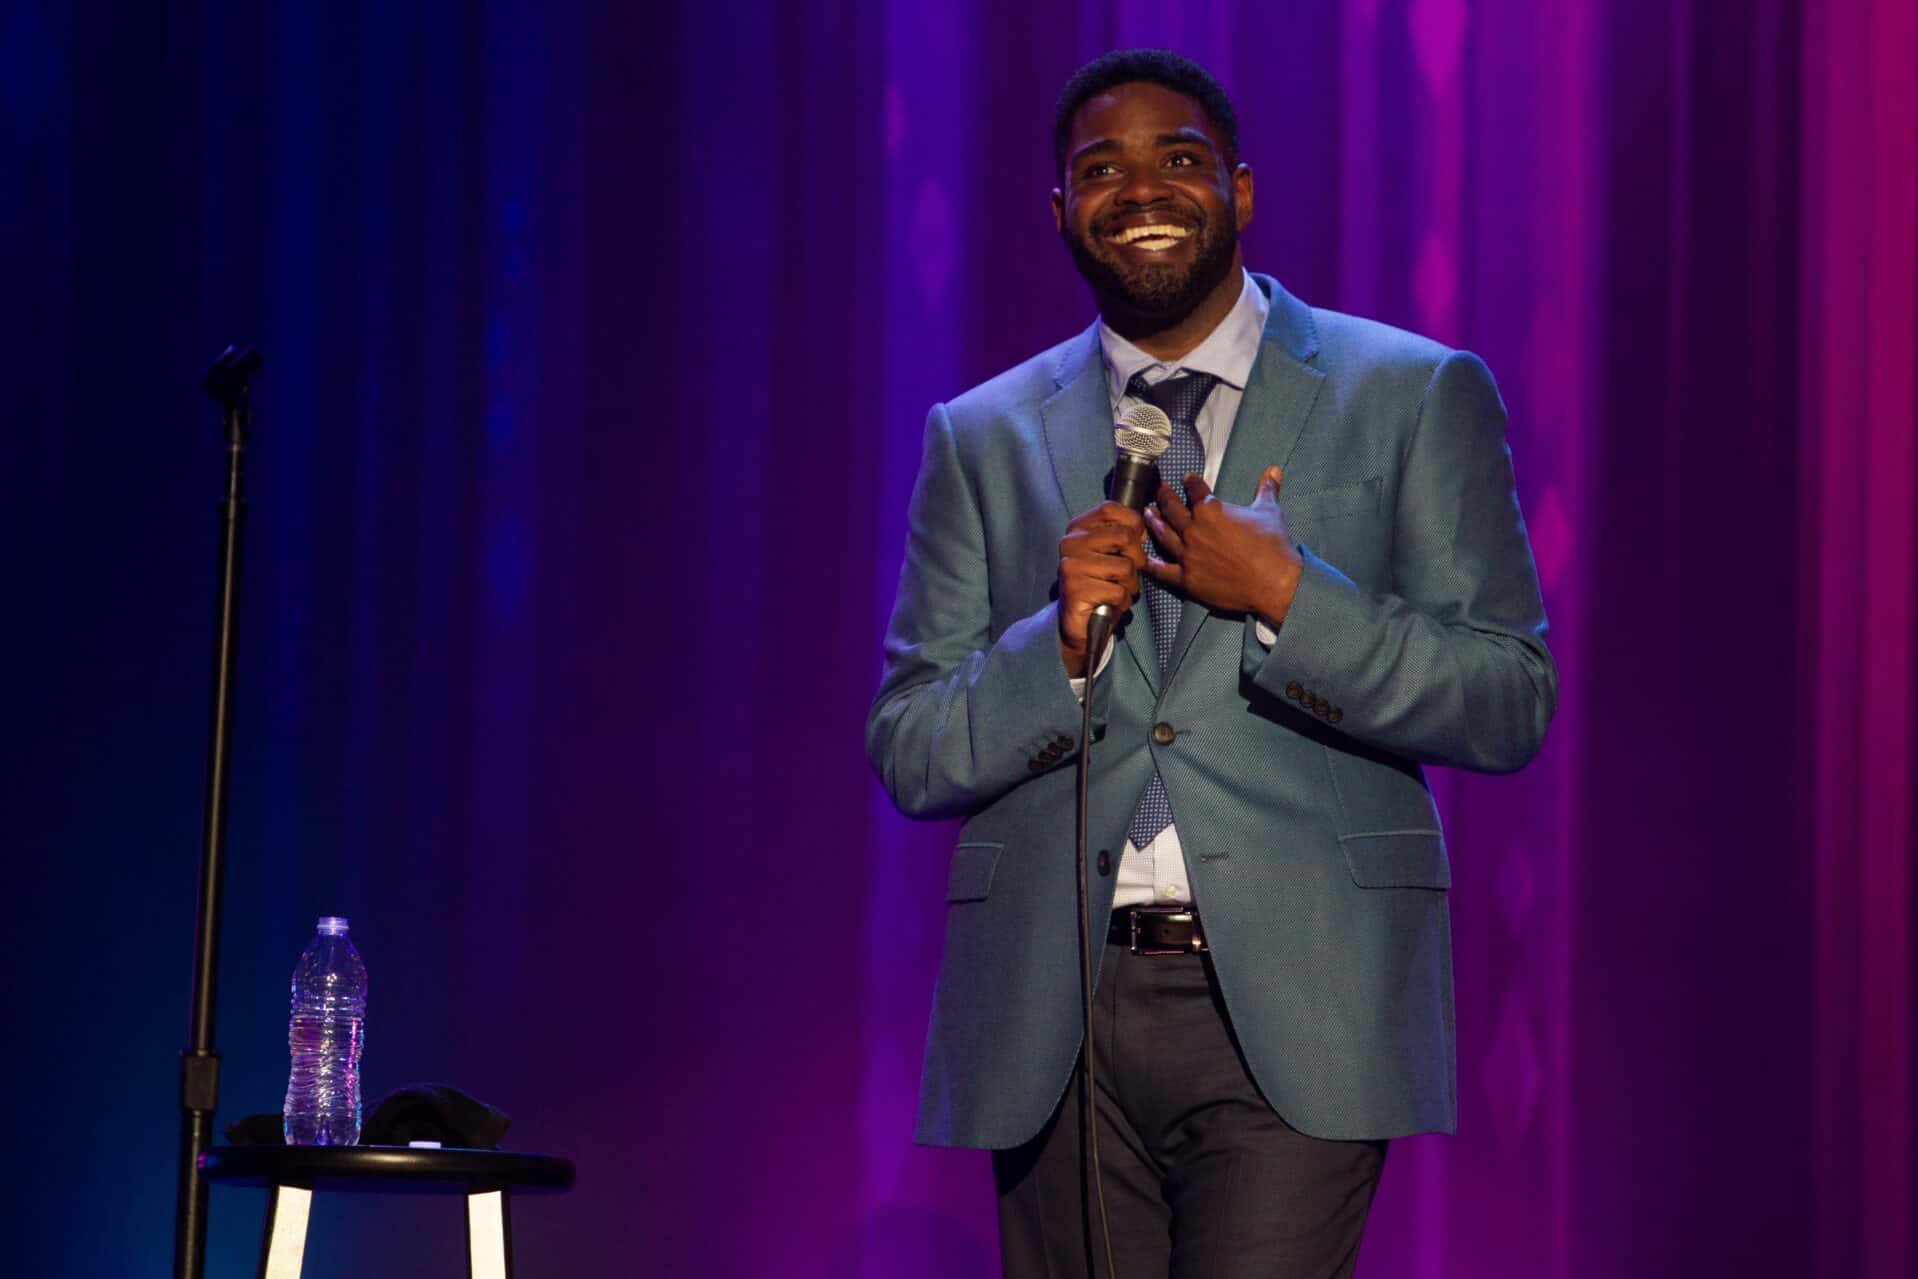 Ron Funches doing a stand-up comedy performance